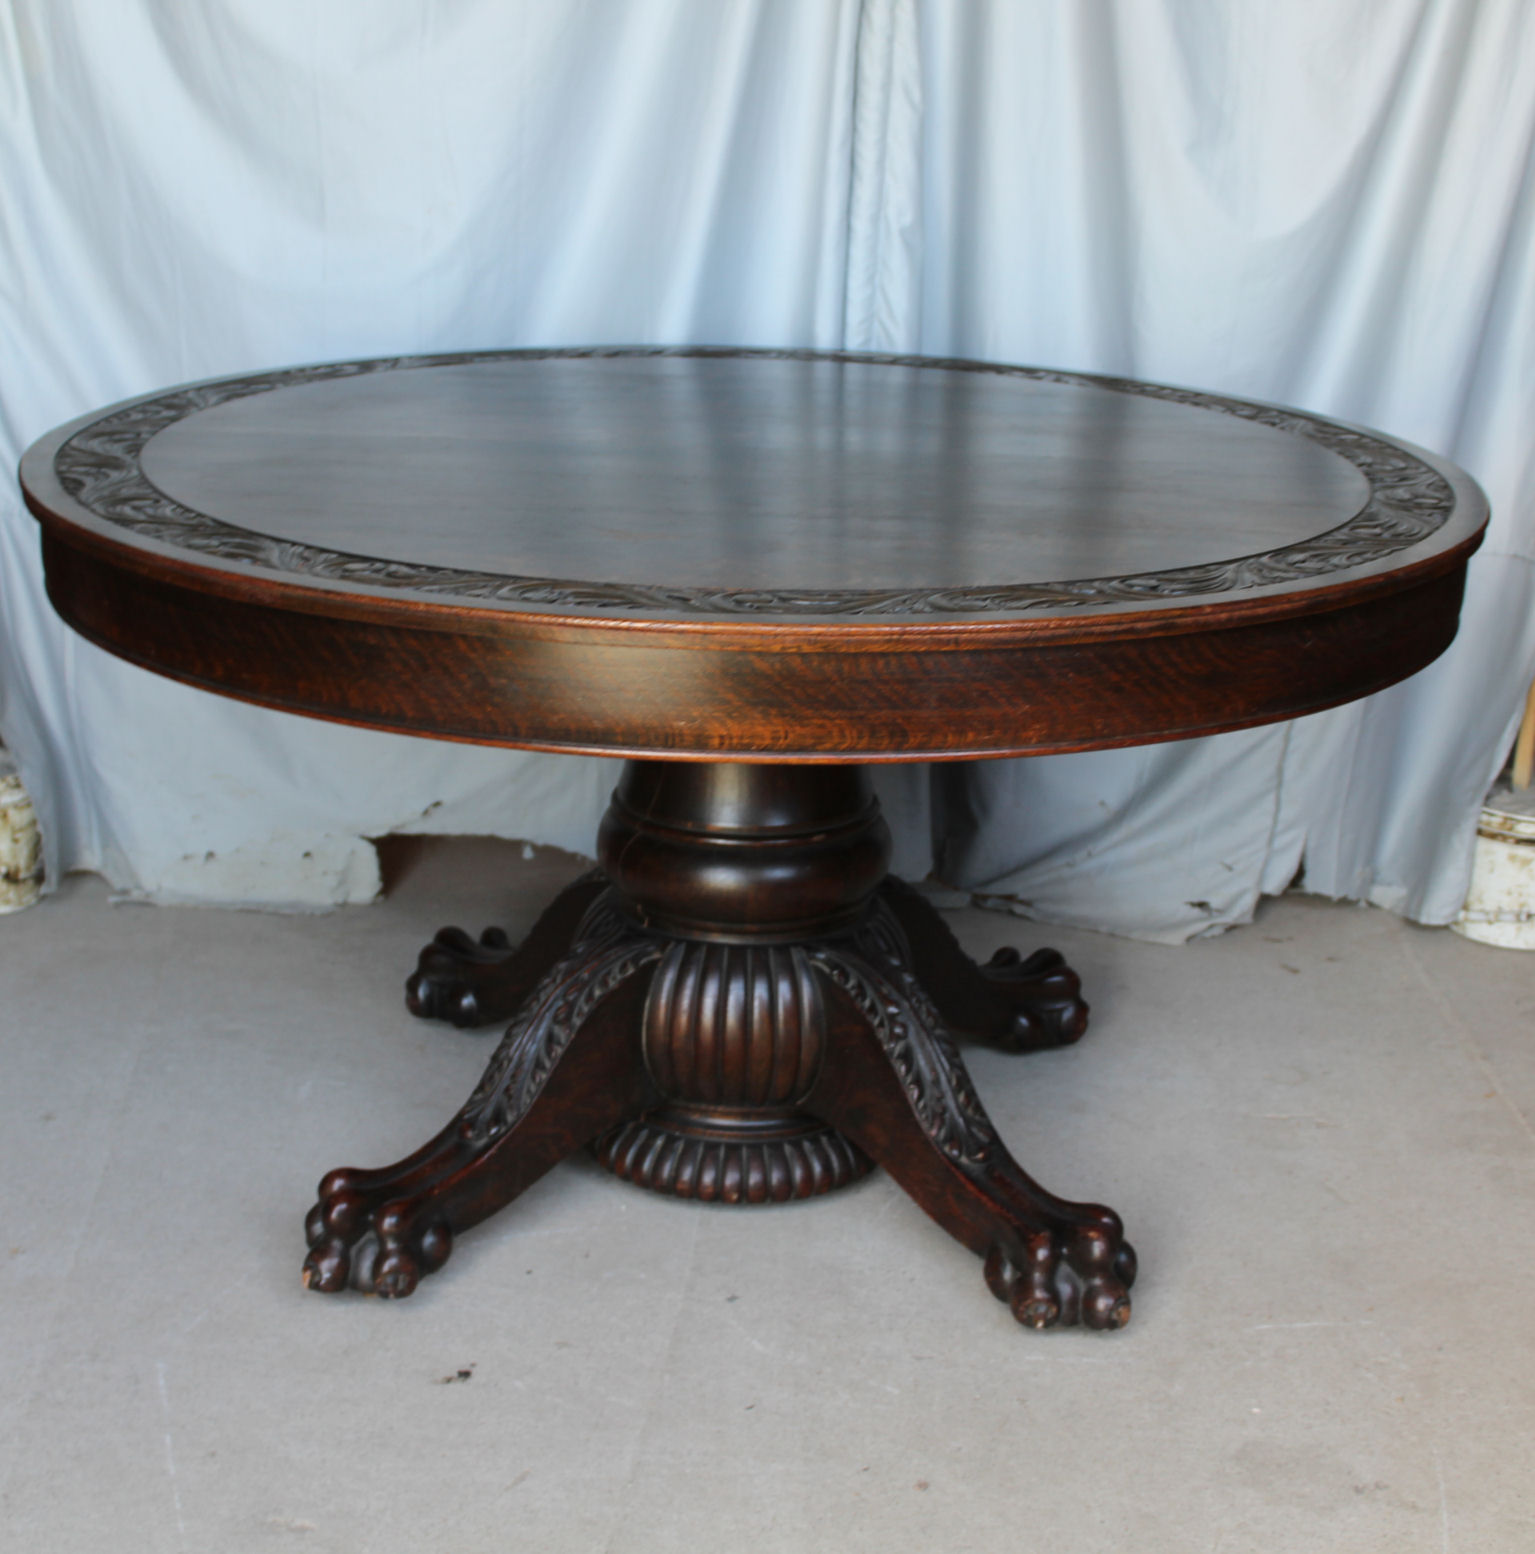 Bargain John S Antiques Antique Round 54 Oak Dining Table Carved Top And Claw Feet Plus Leaves Bargain John S Antiques